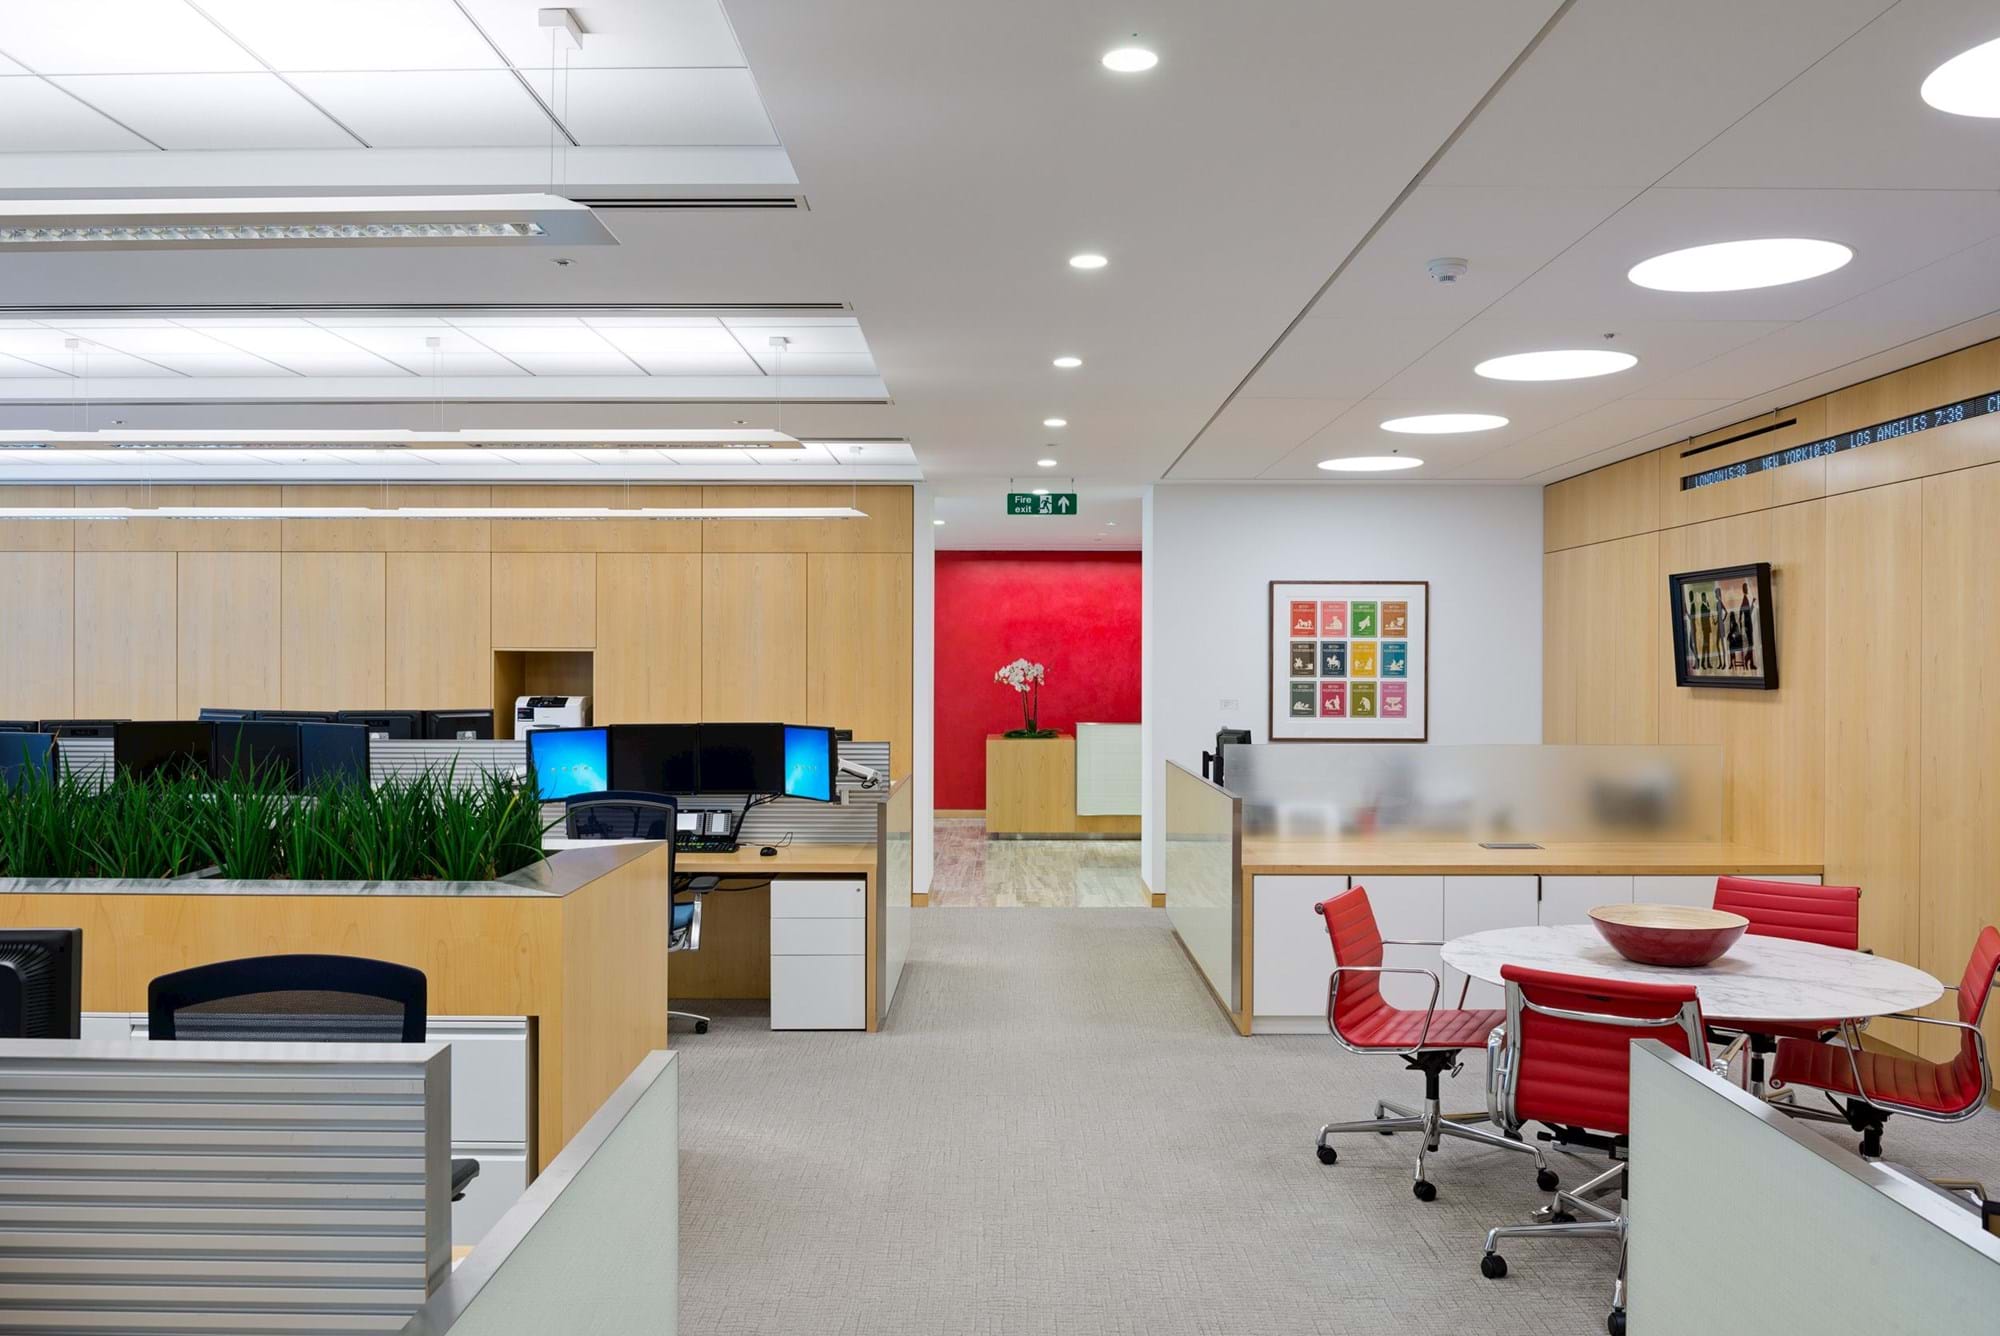 Modus Workspace office design, fit out and refurbishment - Angelo Gordon - Open Plan Office - Angelo Gordon 08 highres-without logo sRGB.jpg